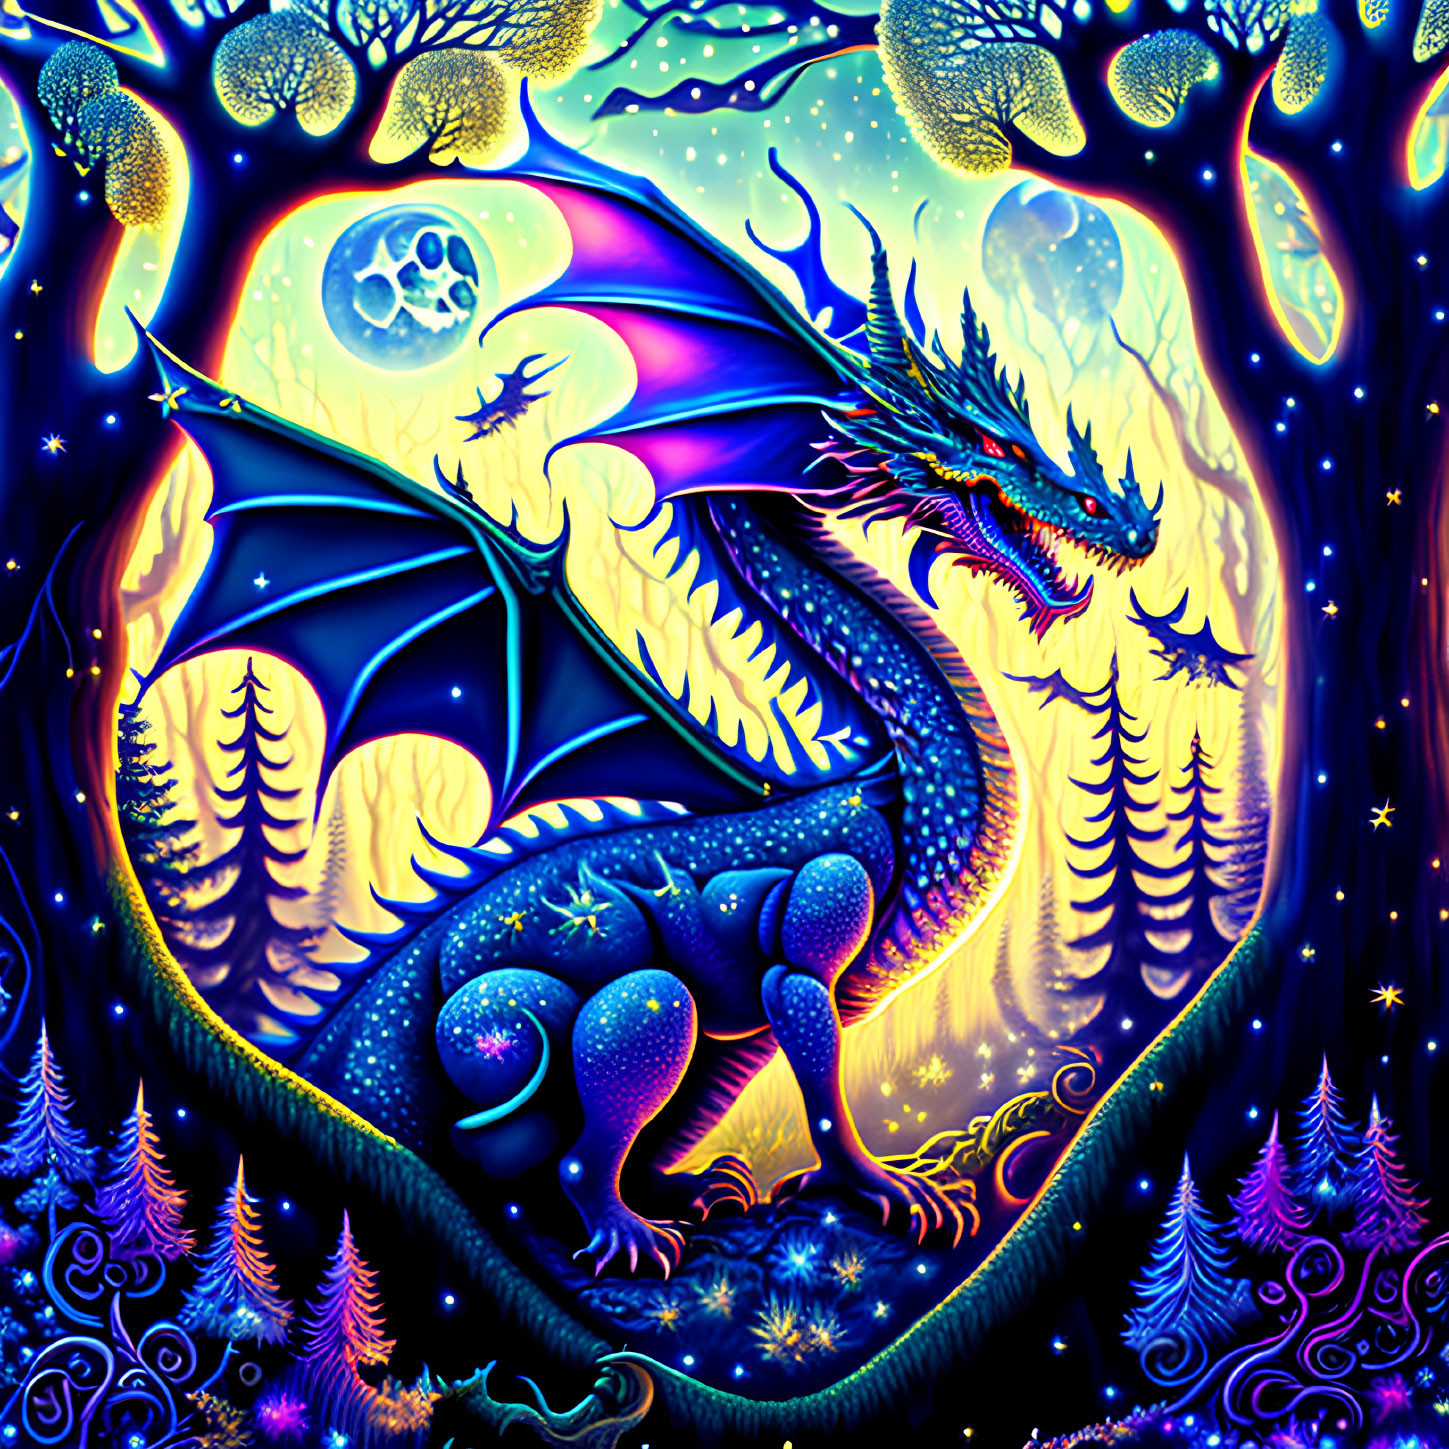 Blue dragon in psychedelic forest with moon and stars